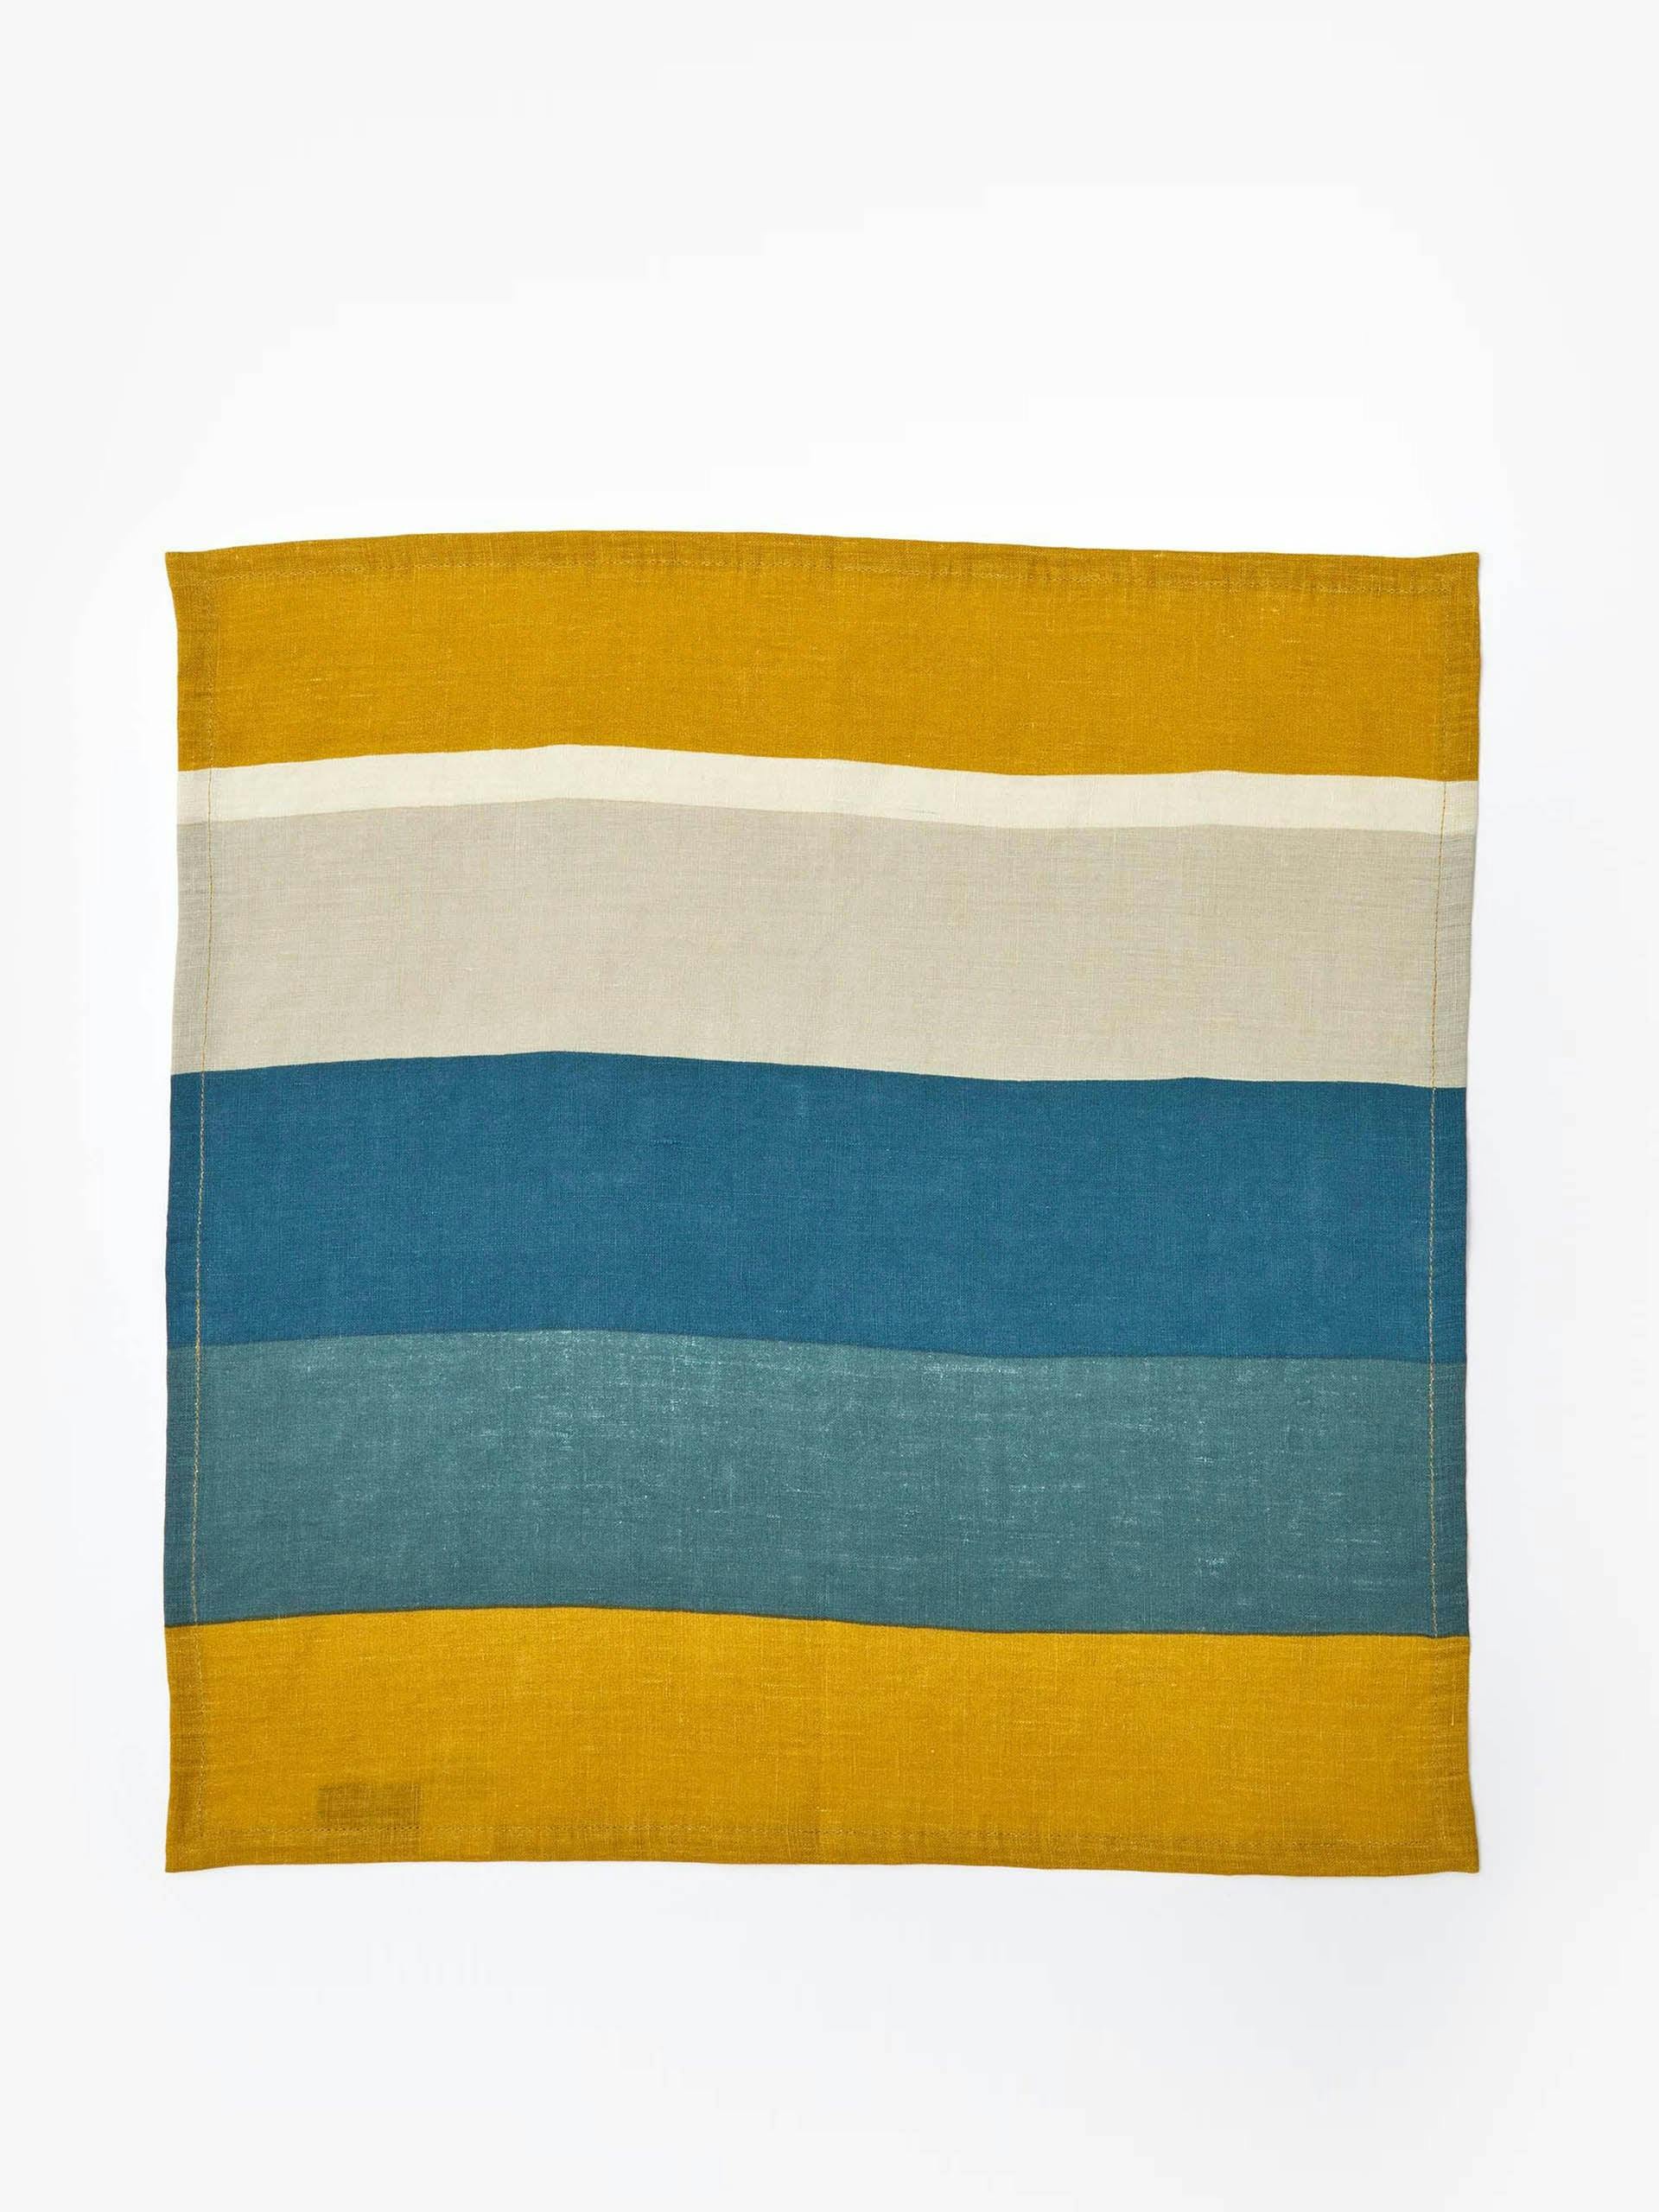 Bold Striped Napkin in ochre and teal